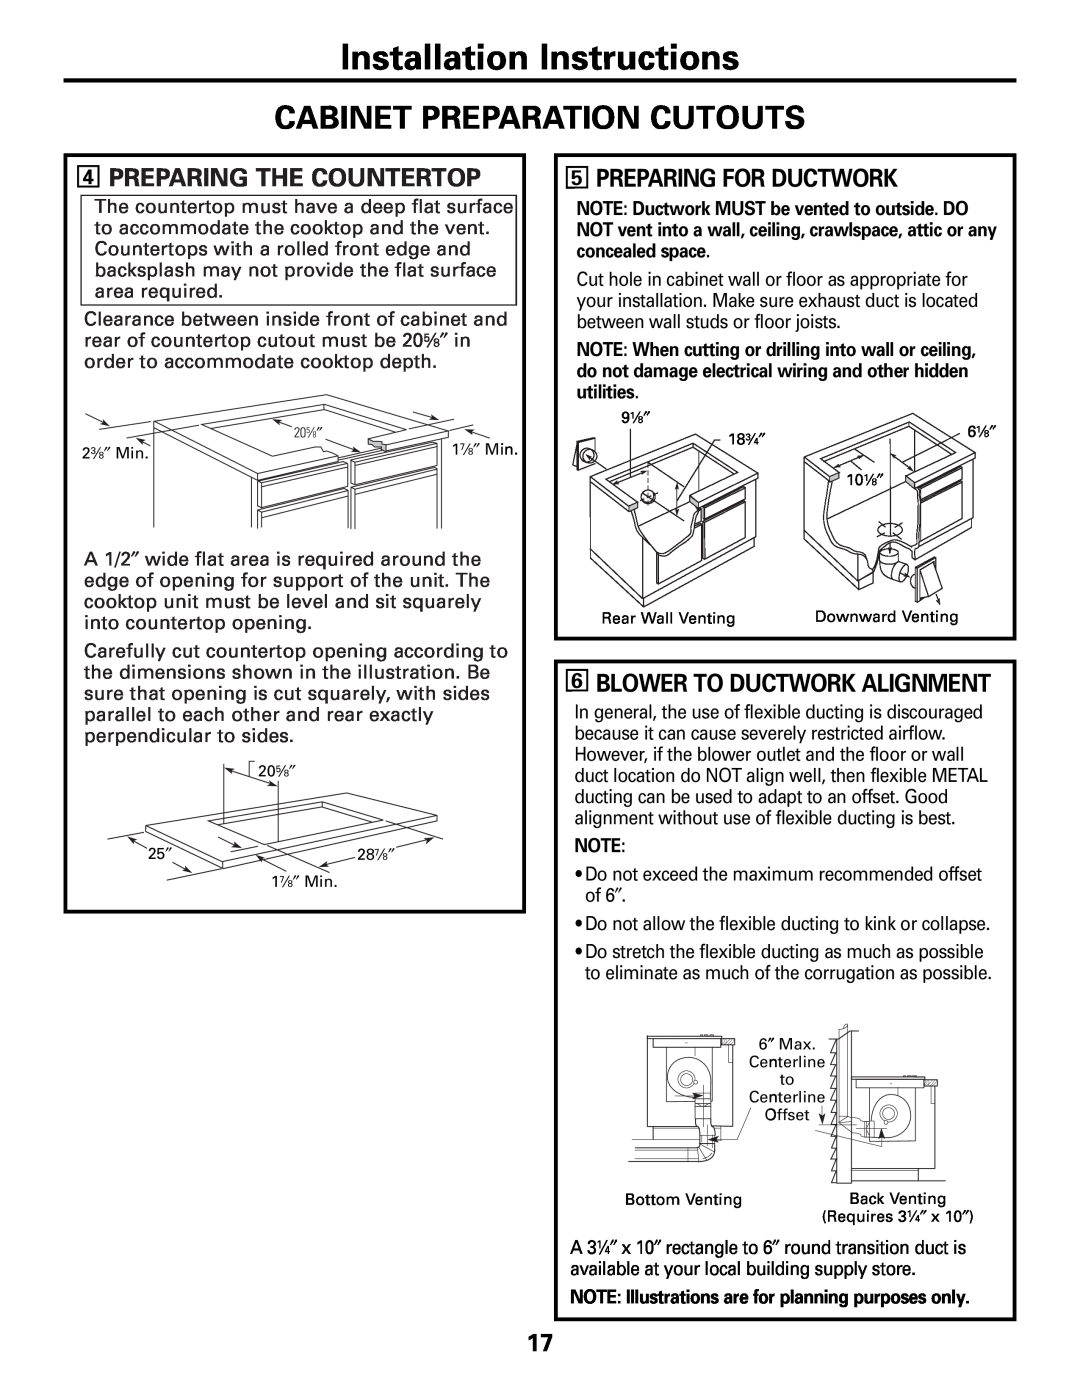 GE JP989SKSS Cabinet Preparation Cutouts, 4PREPARING THE COUNTERTOP, 5PREPARING FOR DUCTWORK, Installation Instructions 